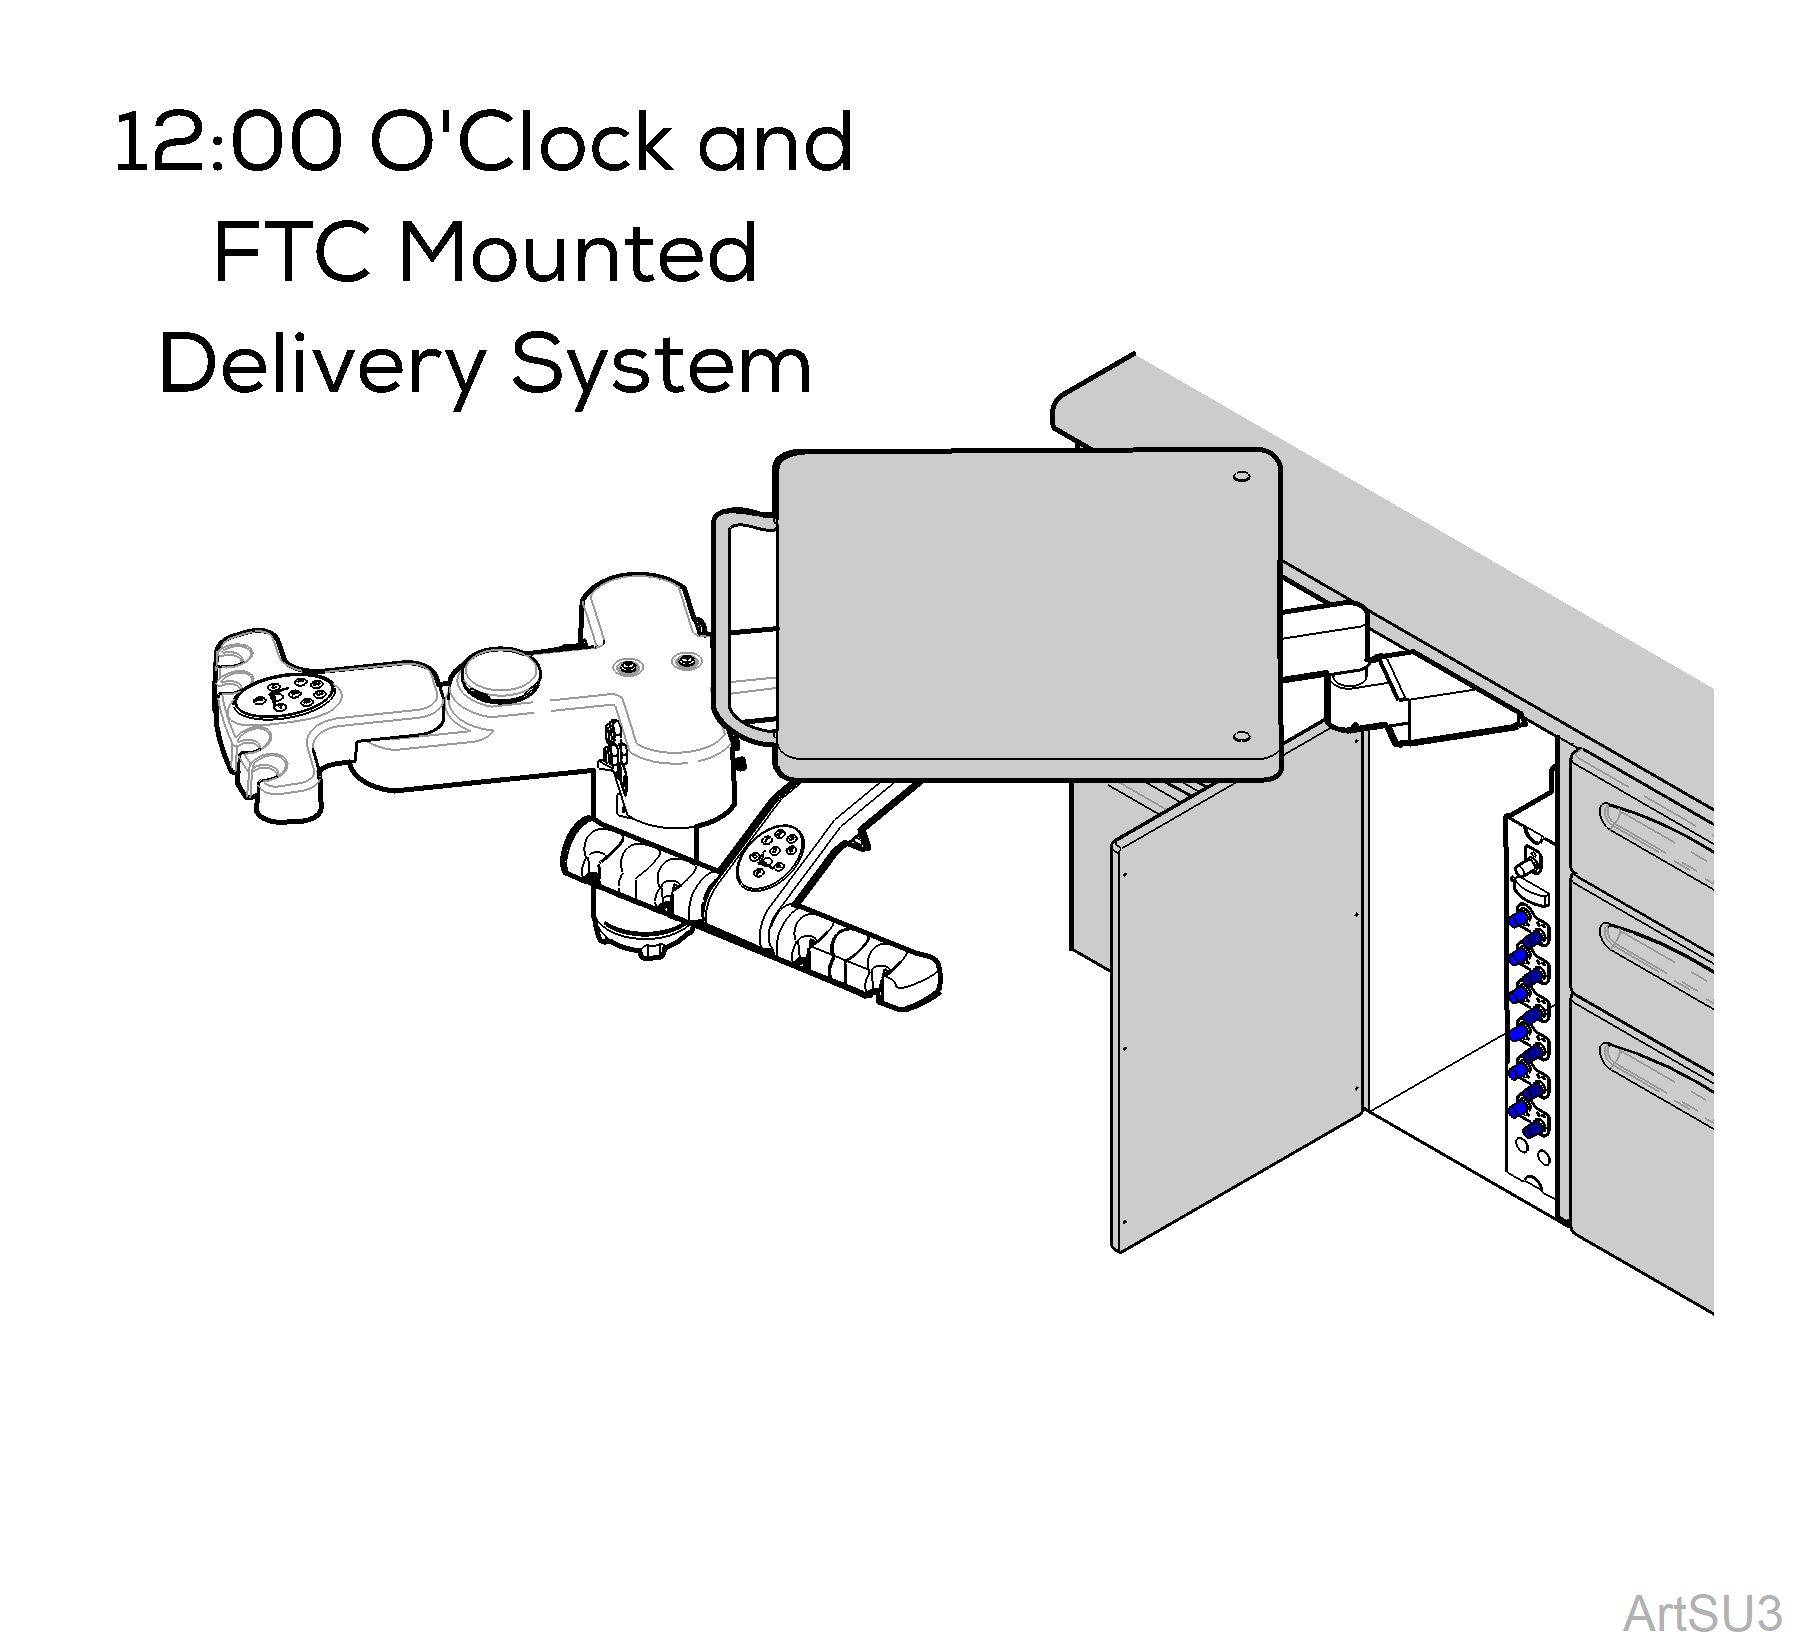 12:00 O'Clock and FTC Delivery System